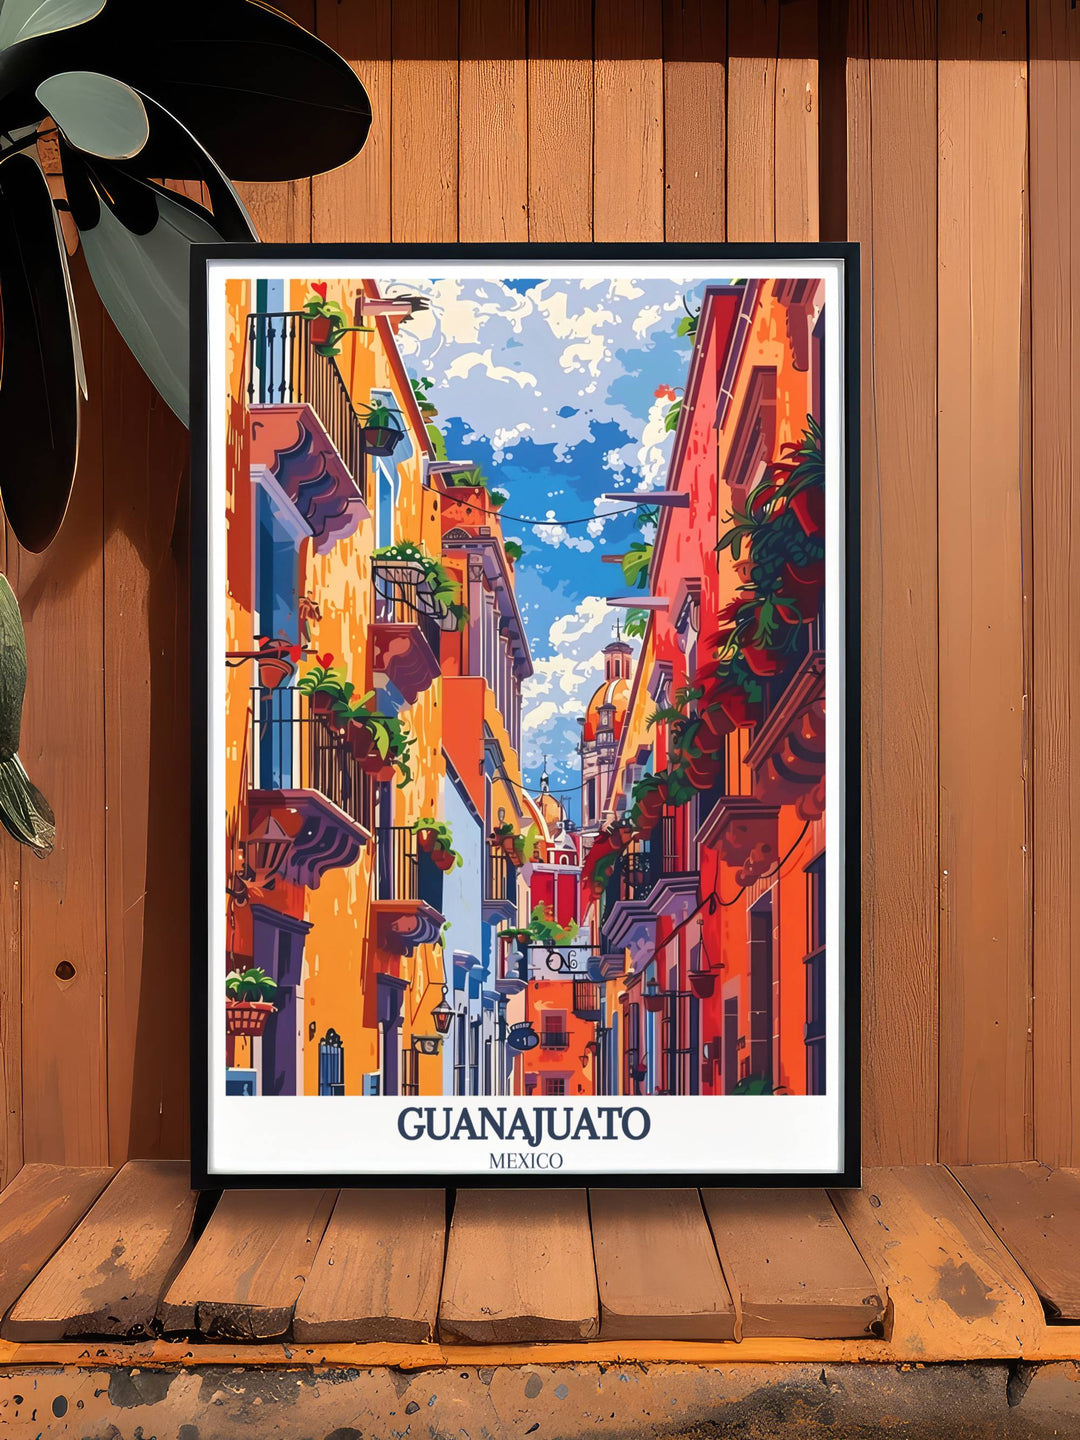 Elegant Guanajuato poster featuring the iconic Juarez Theater, a symbol of the citys rich cultural heritage and artistic legacy.